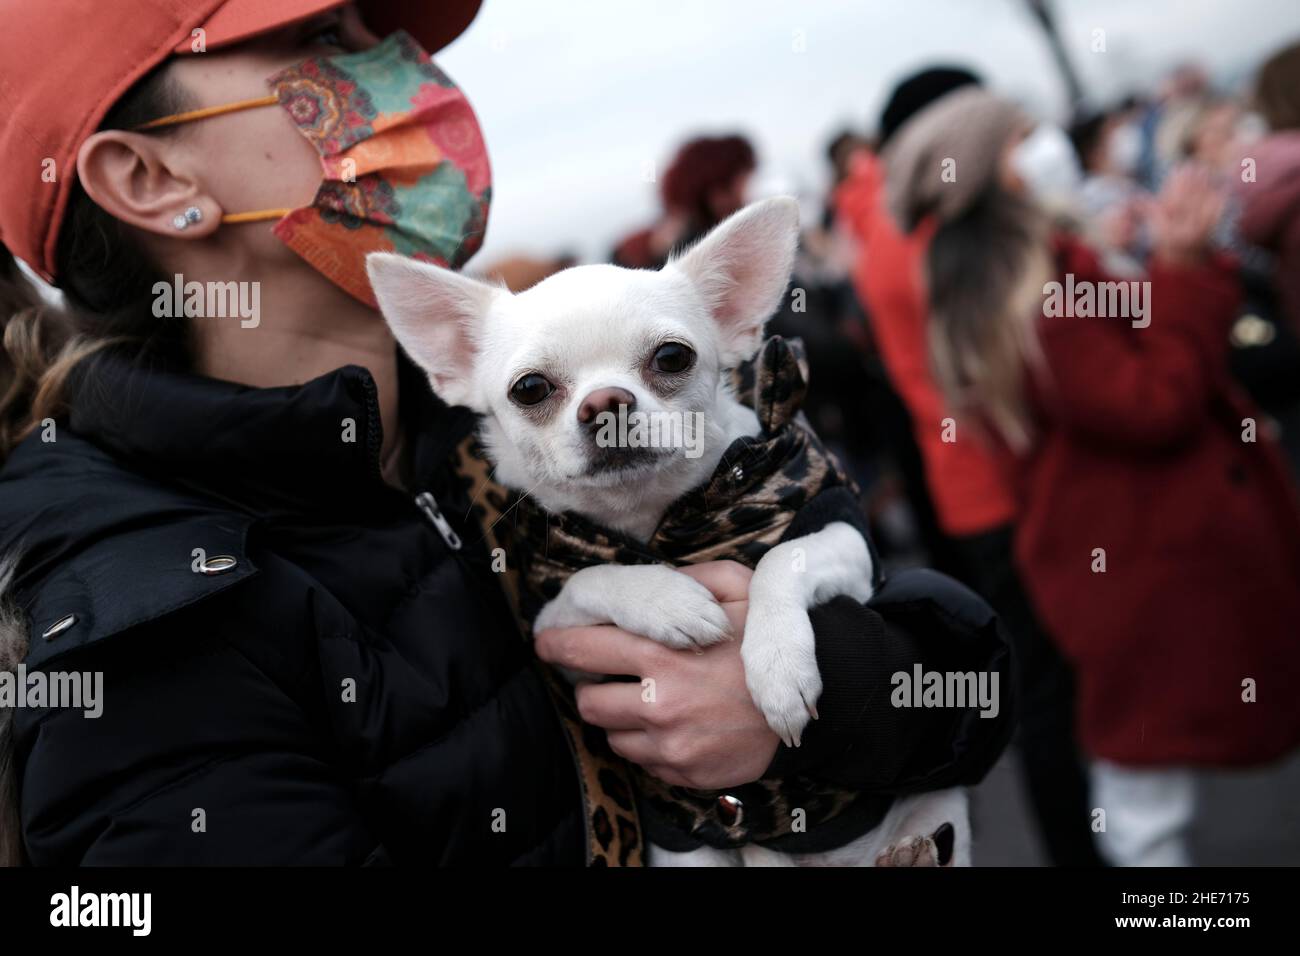 An animal rights activist takes part in a demonstration with her pet dog demanding protection of stray dogs and cats, in Istanbul, Turkey January 9, 2022. REUTERS/Murad Sezer Stock Photo